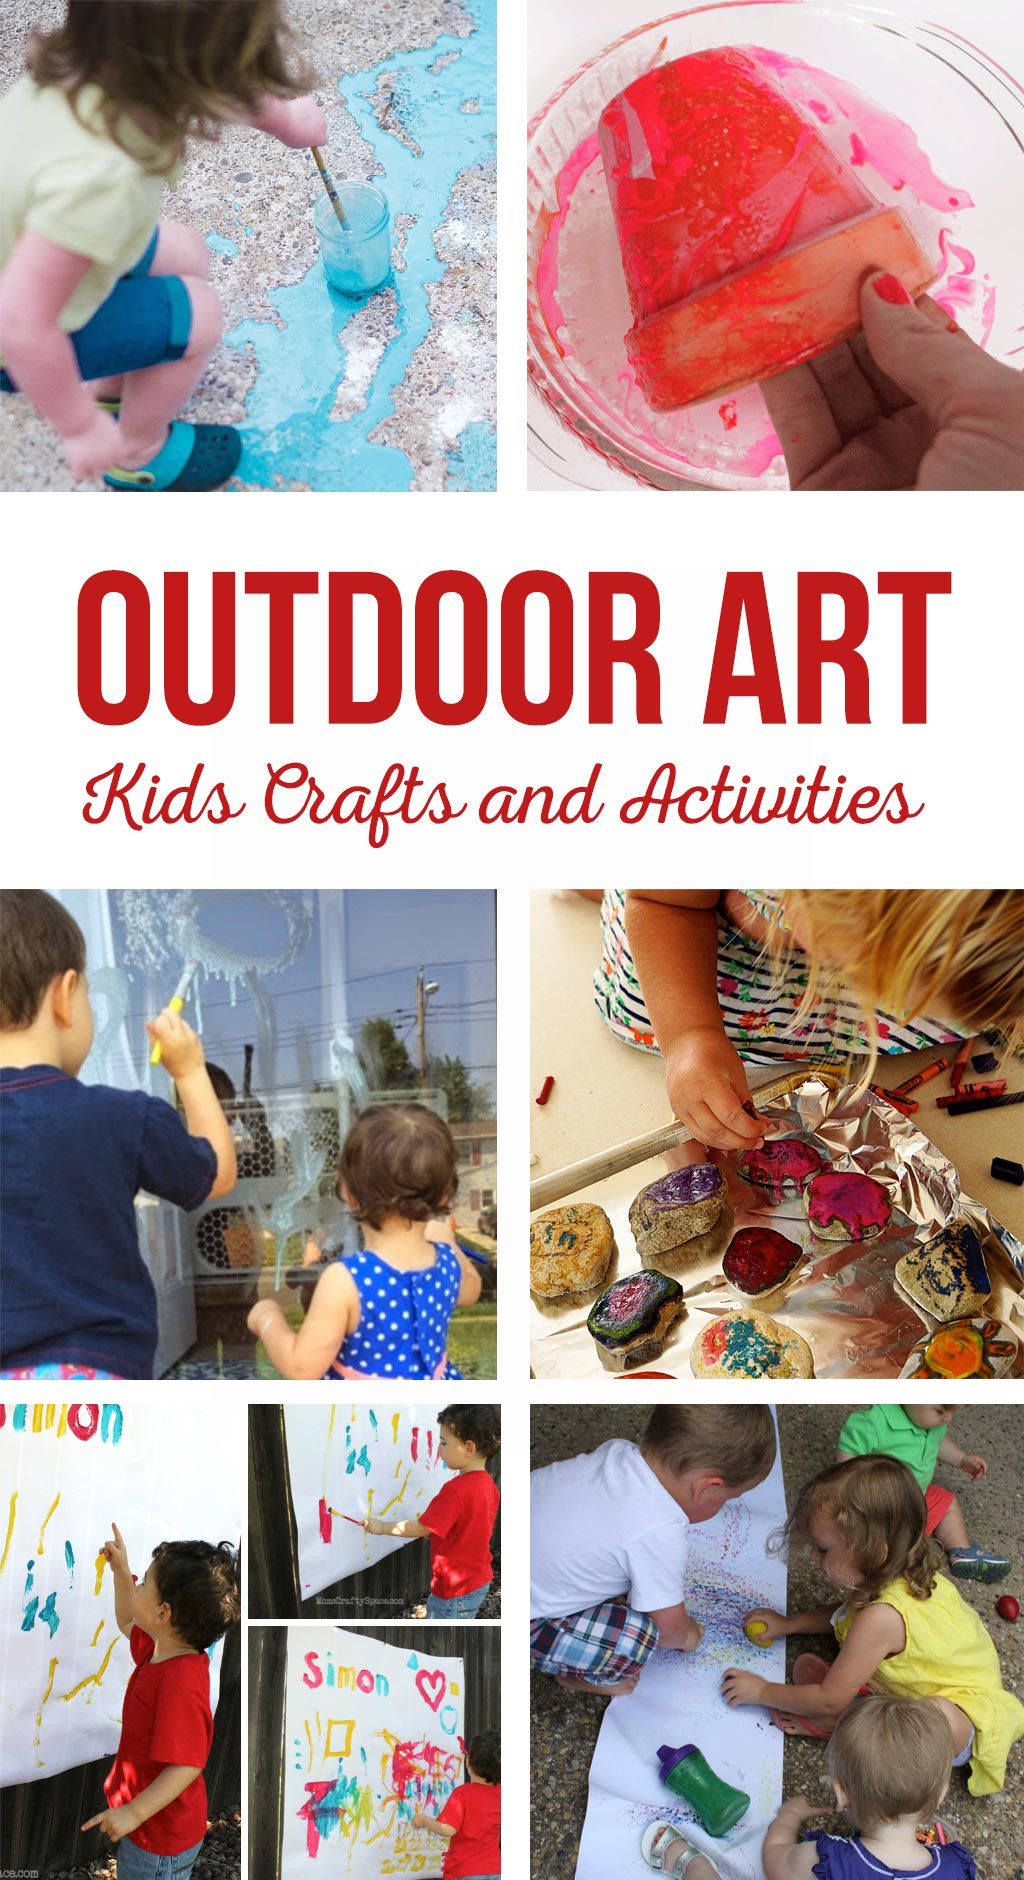 Toddler Arts And Craft Projects
 Outdoor Art Kids Crafts and Activities The Crafting Chicks